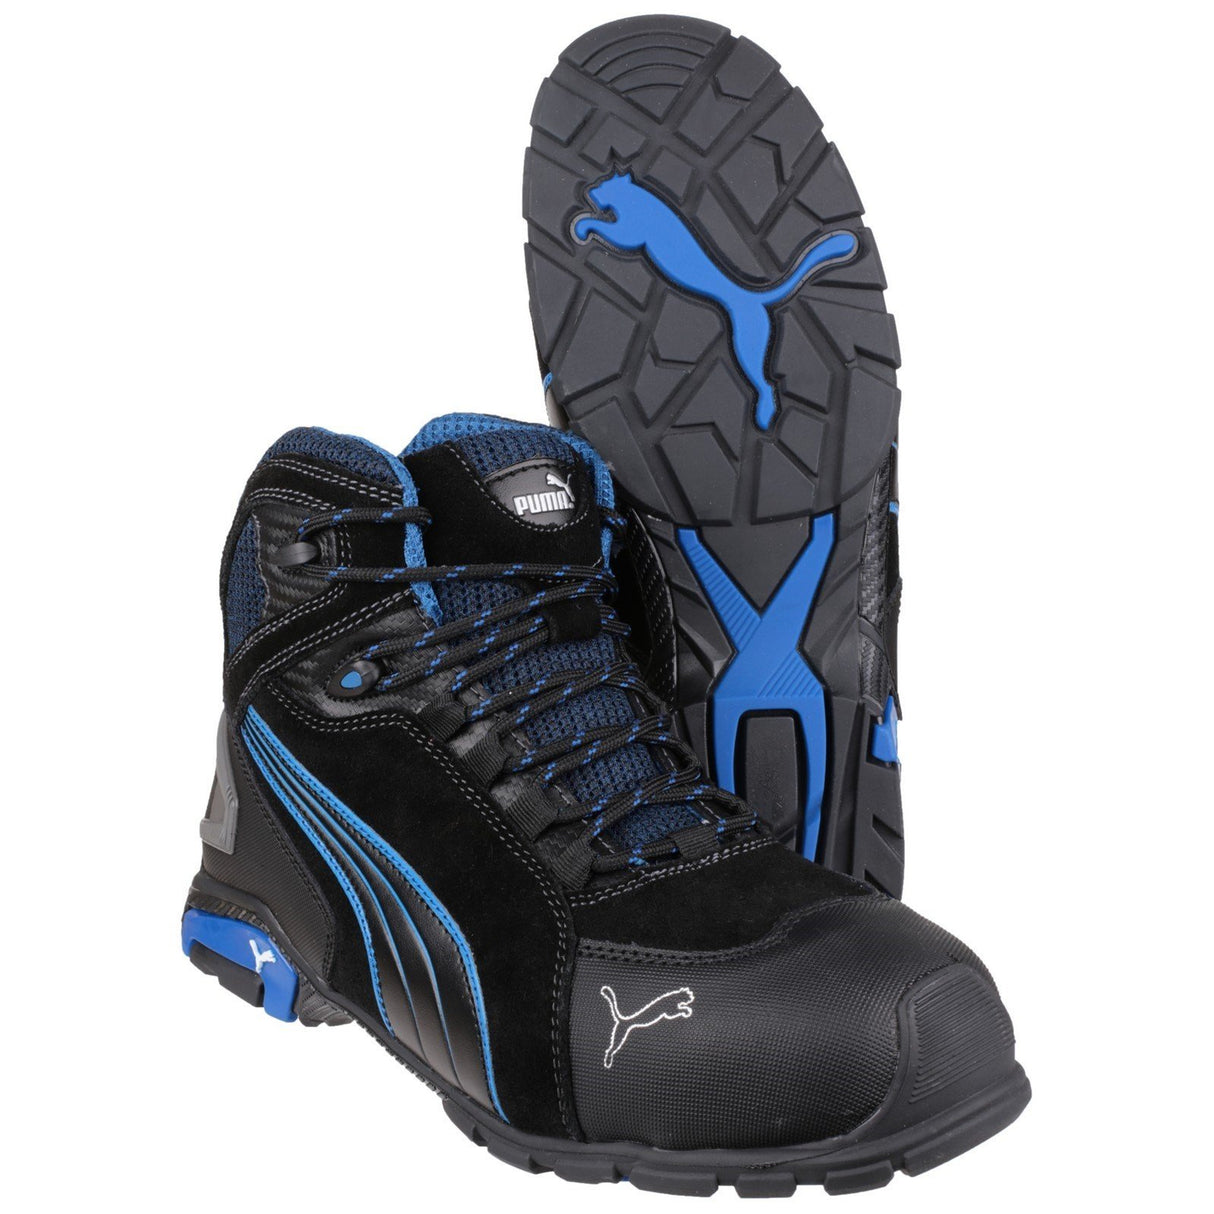 Puma Safety Rio Mid Safety Boots